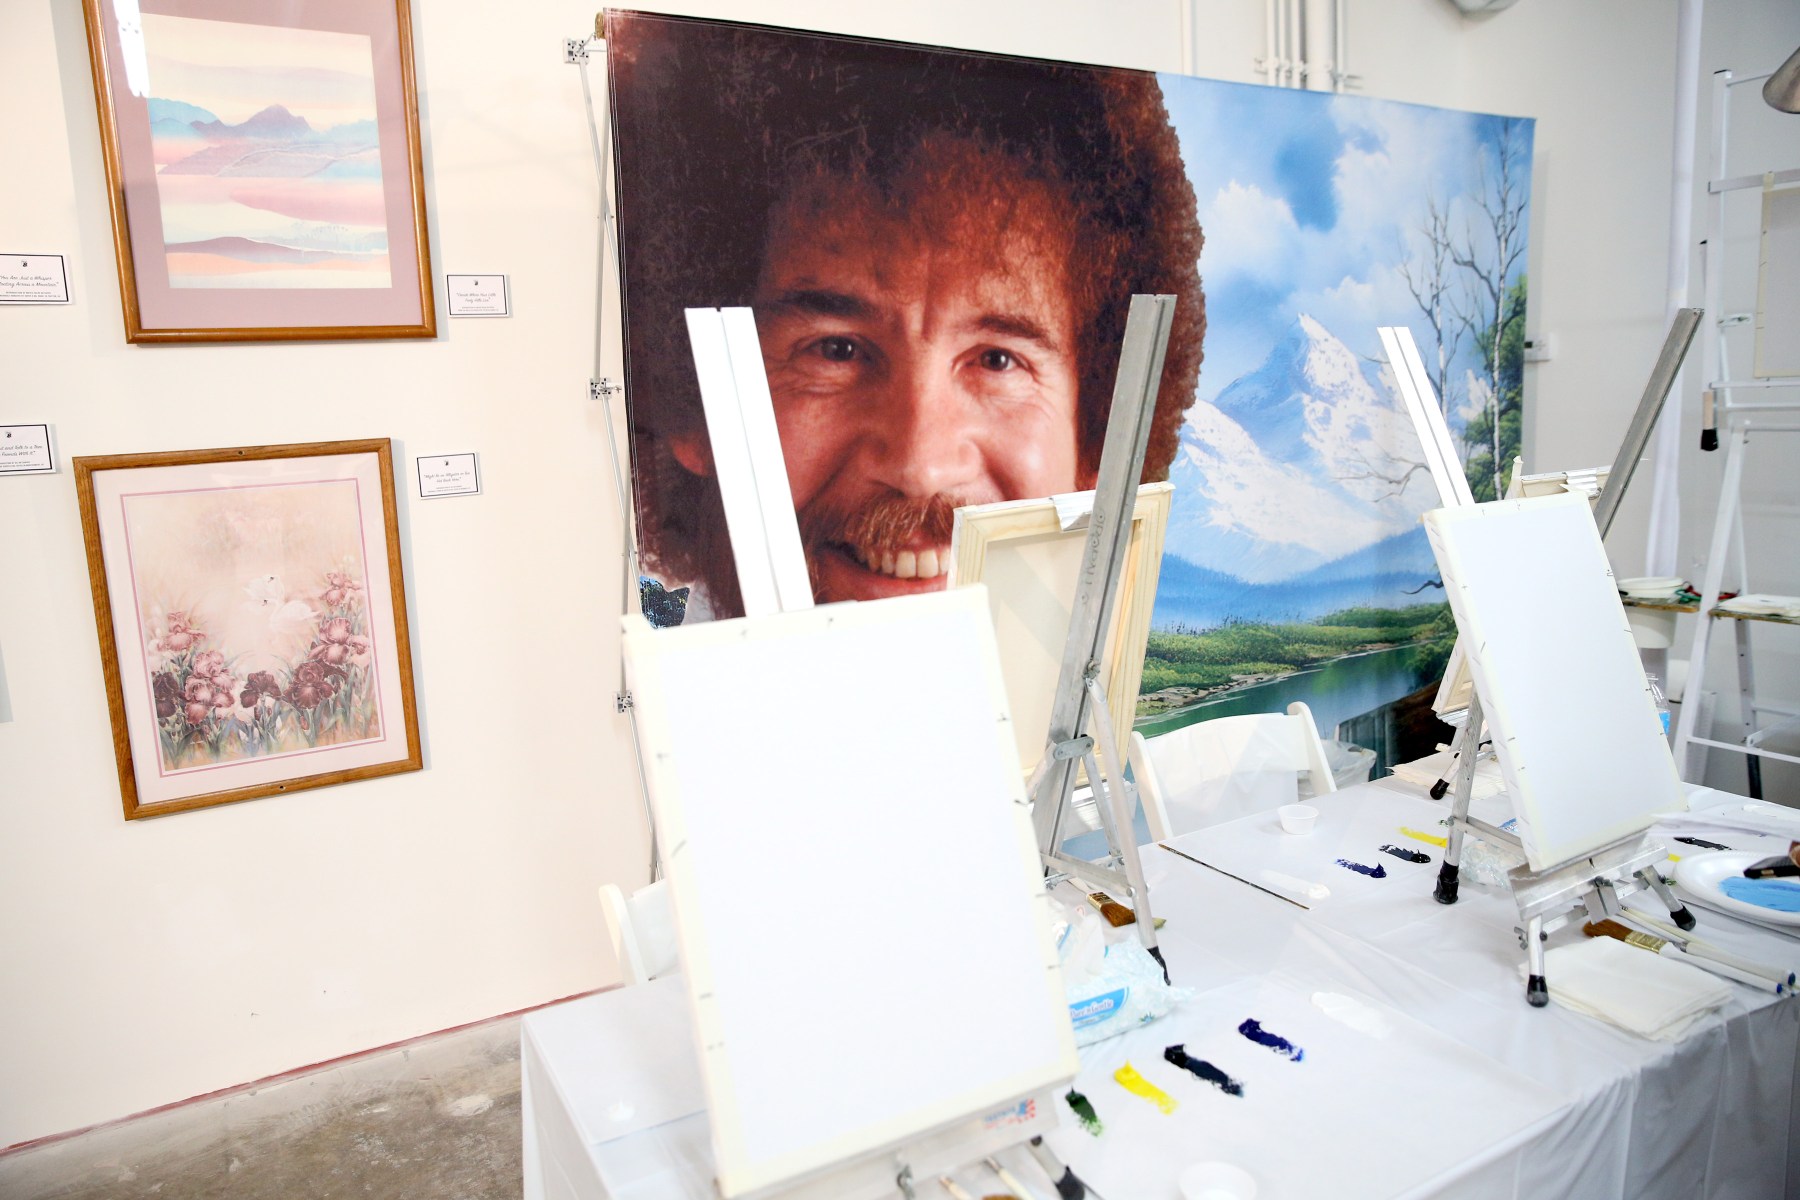 You want to get your hands on a Bob Ross painting? Pity.